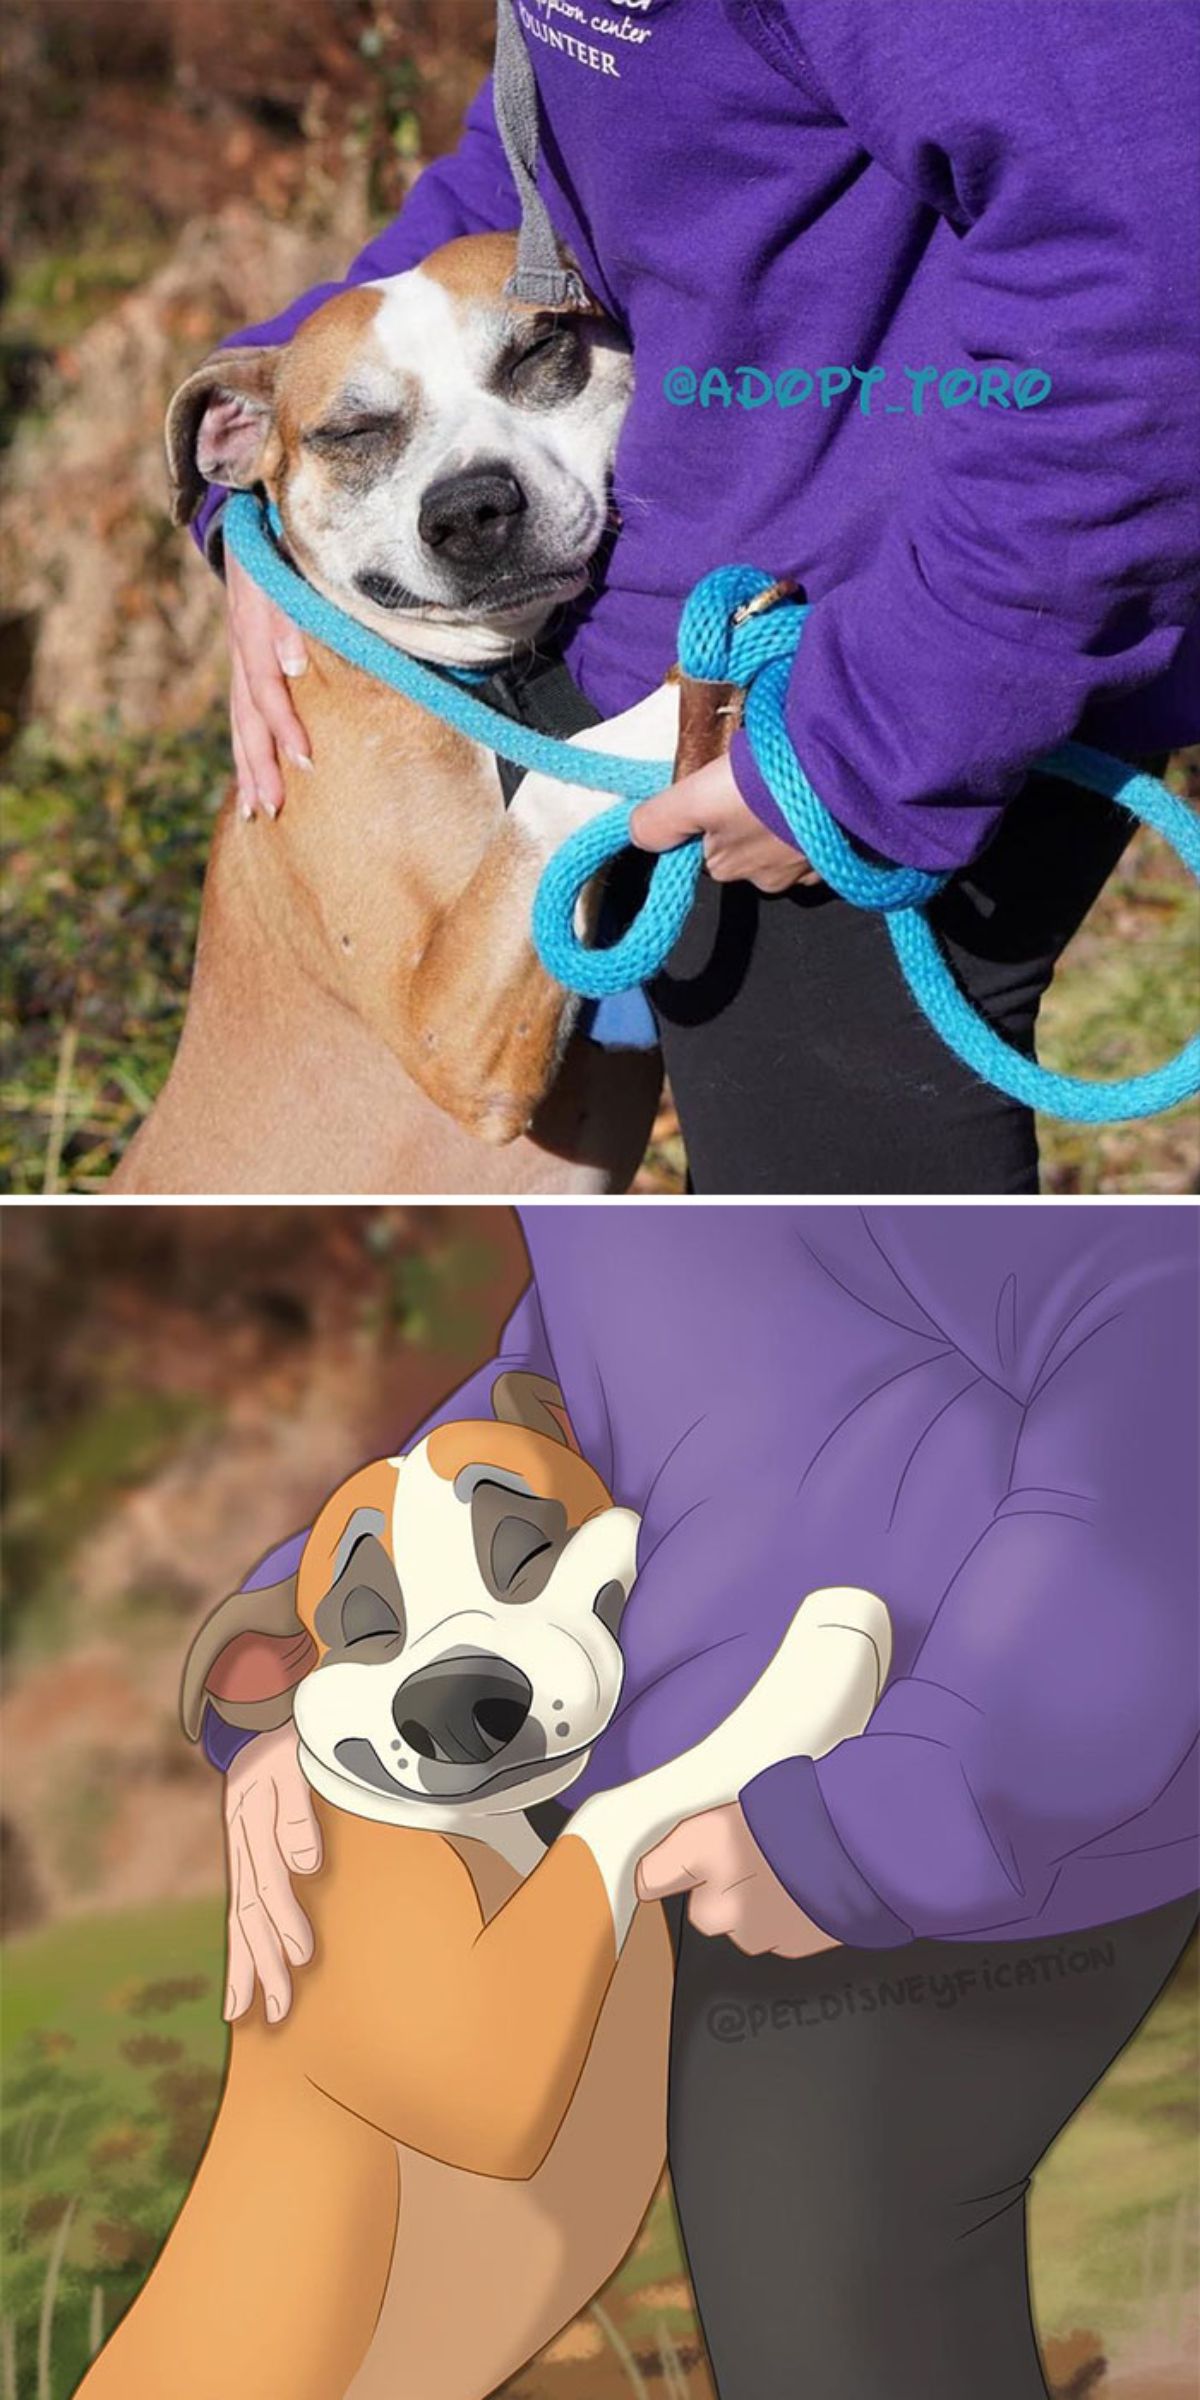 real photo and cartoon image of a brown and white dog wearing a blue leash standing on hidn legs and hugging someone